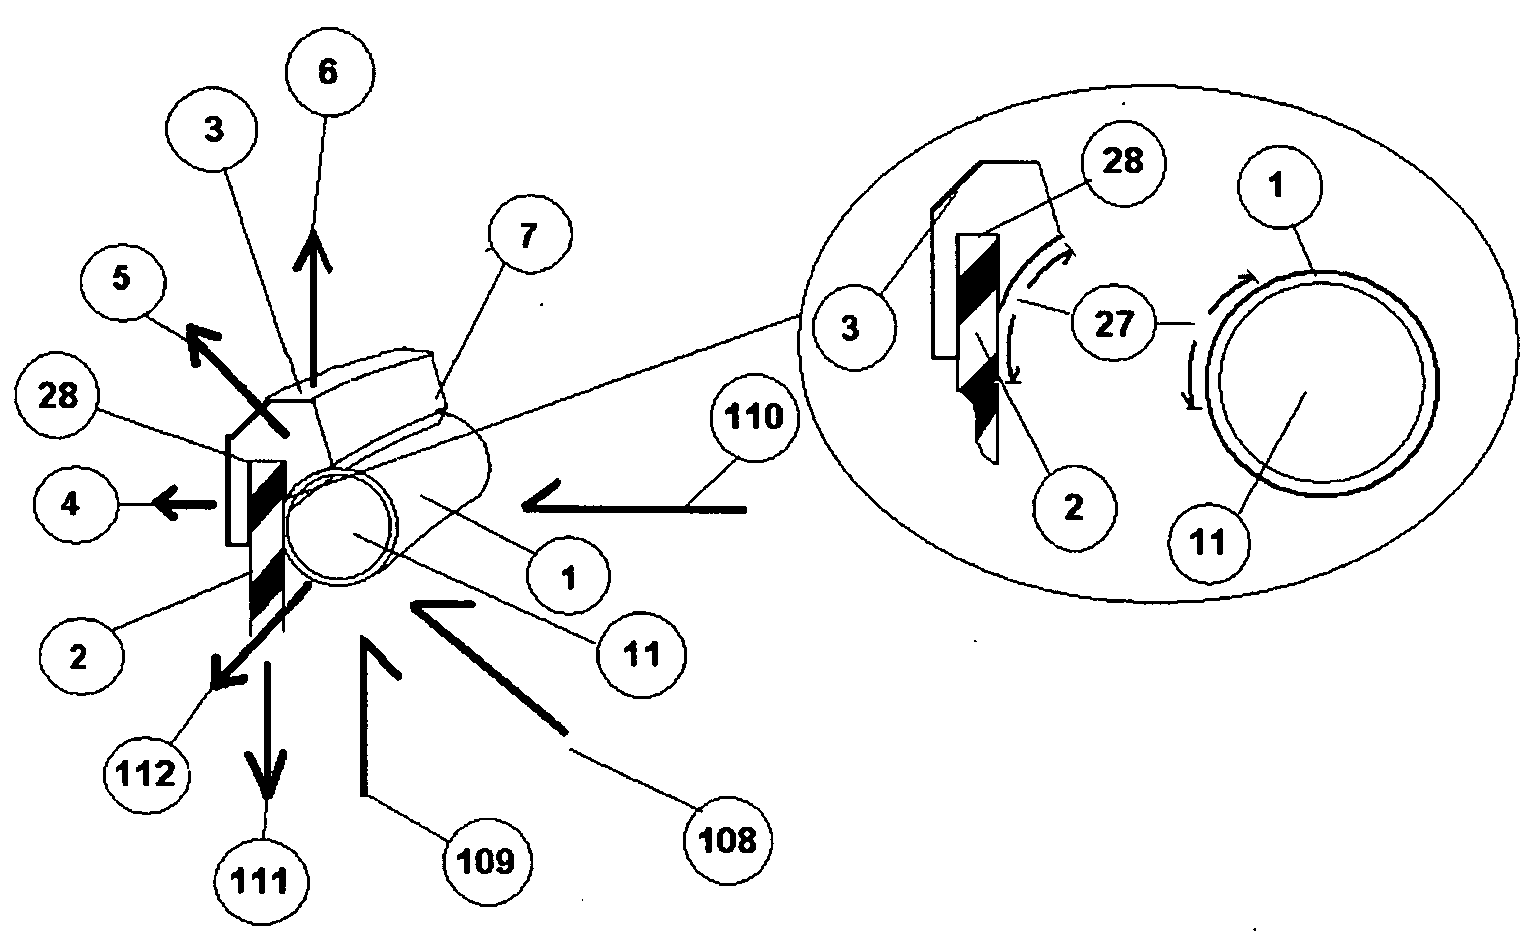 Apparatus for vascular and nerve tissue histogenesis and enhancement